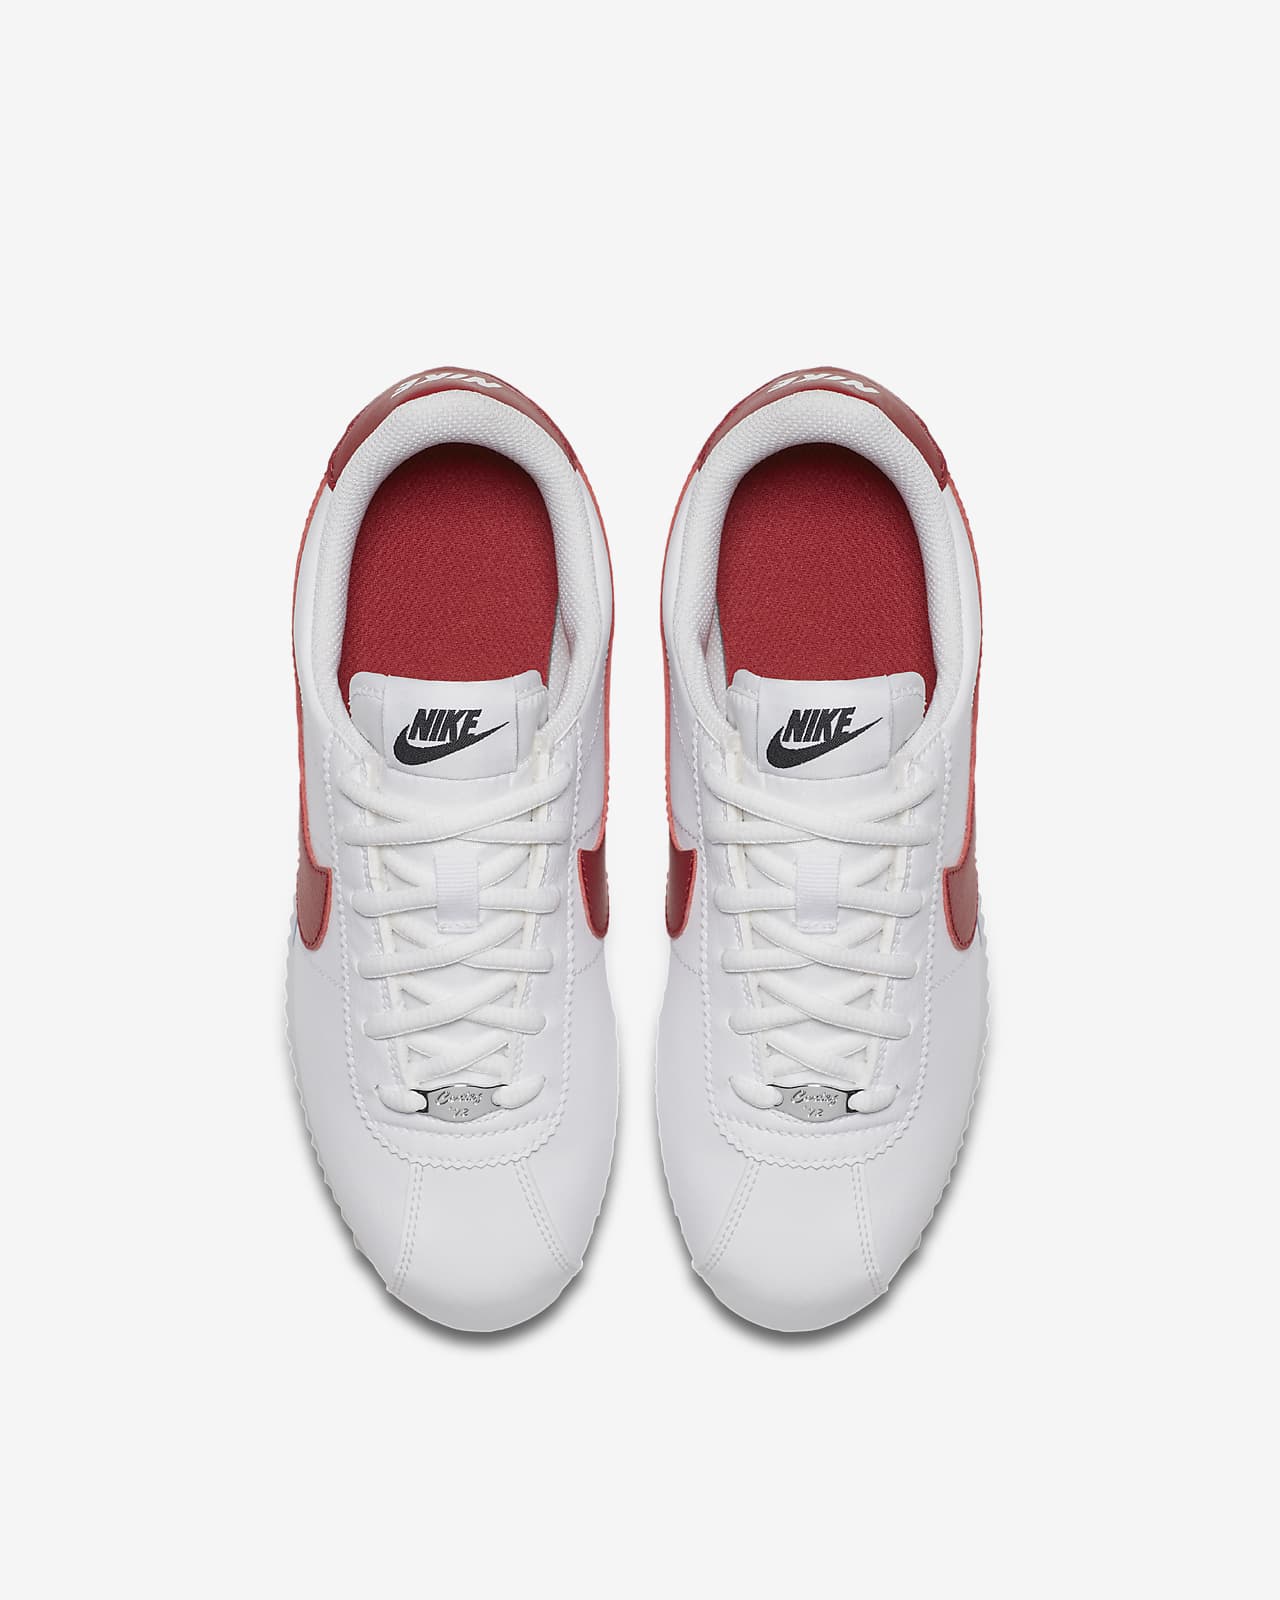 nike shoes boys red